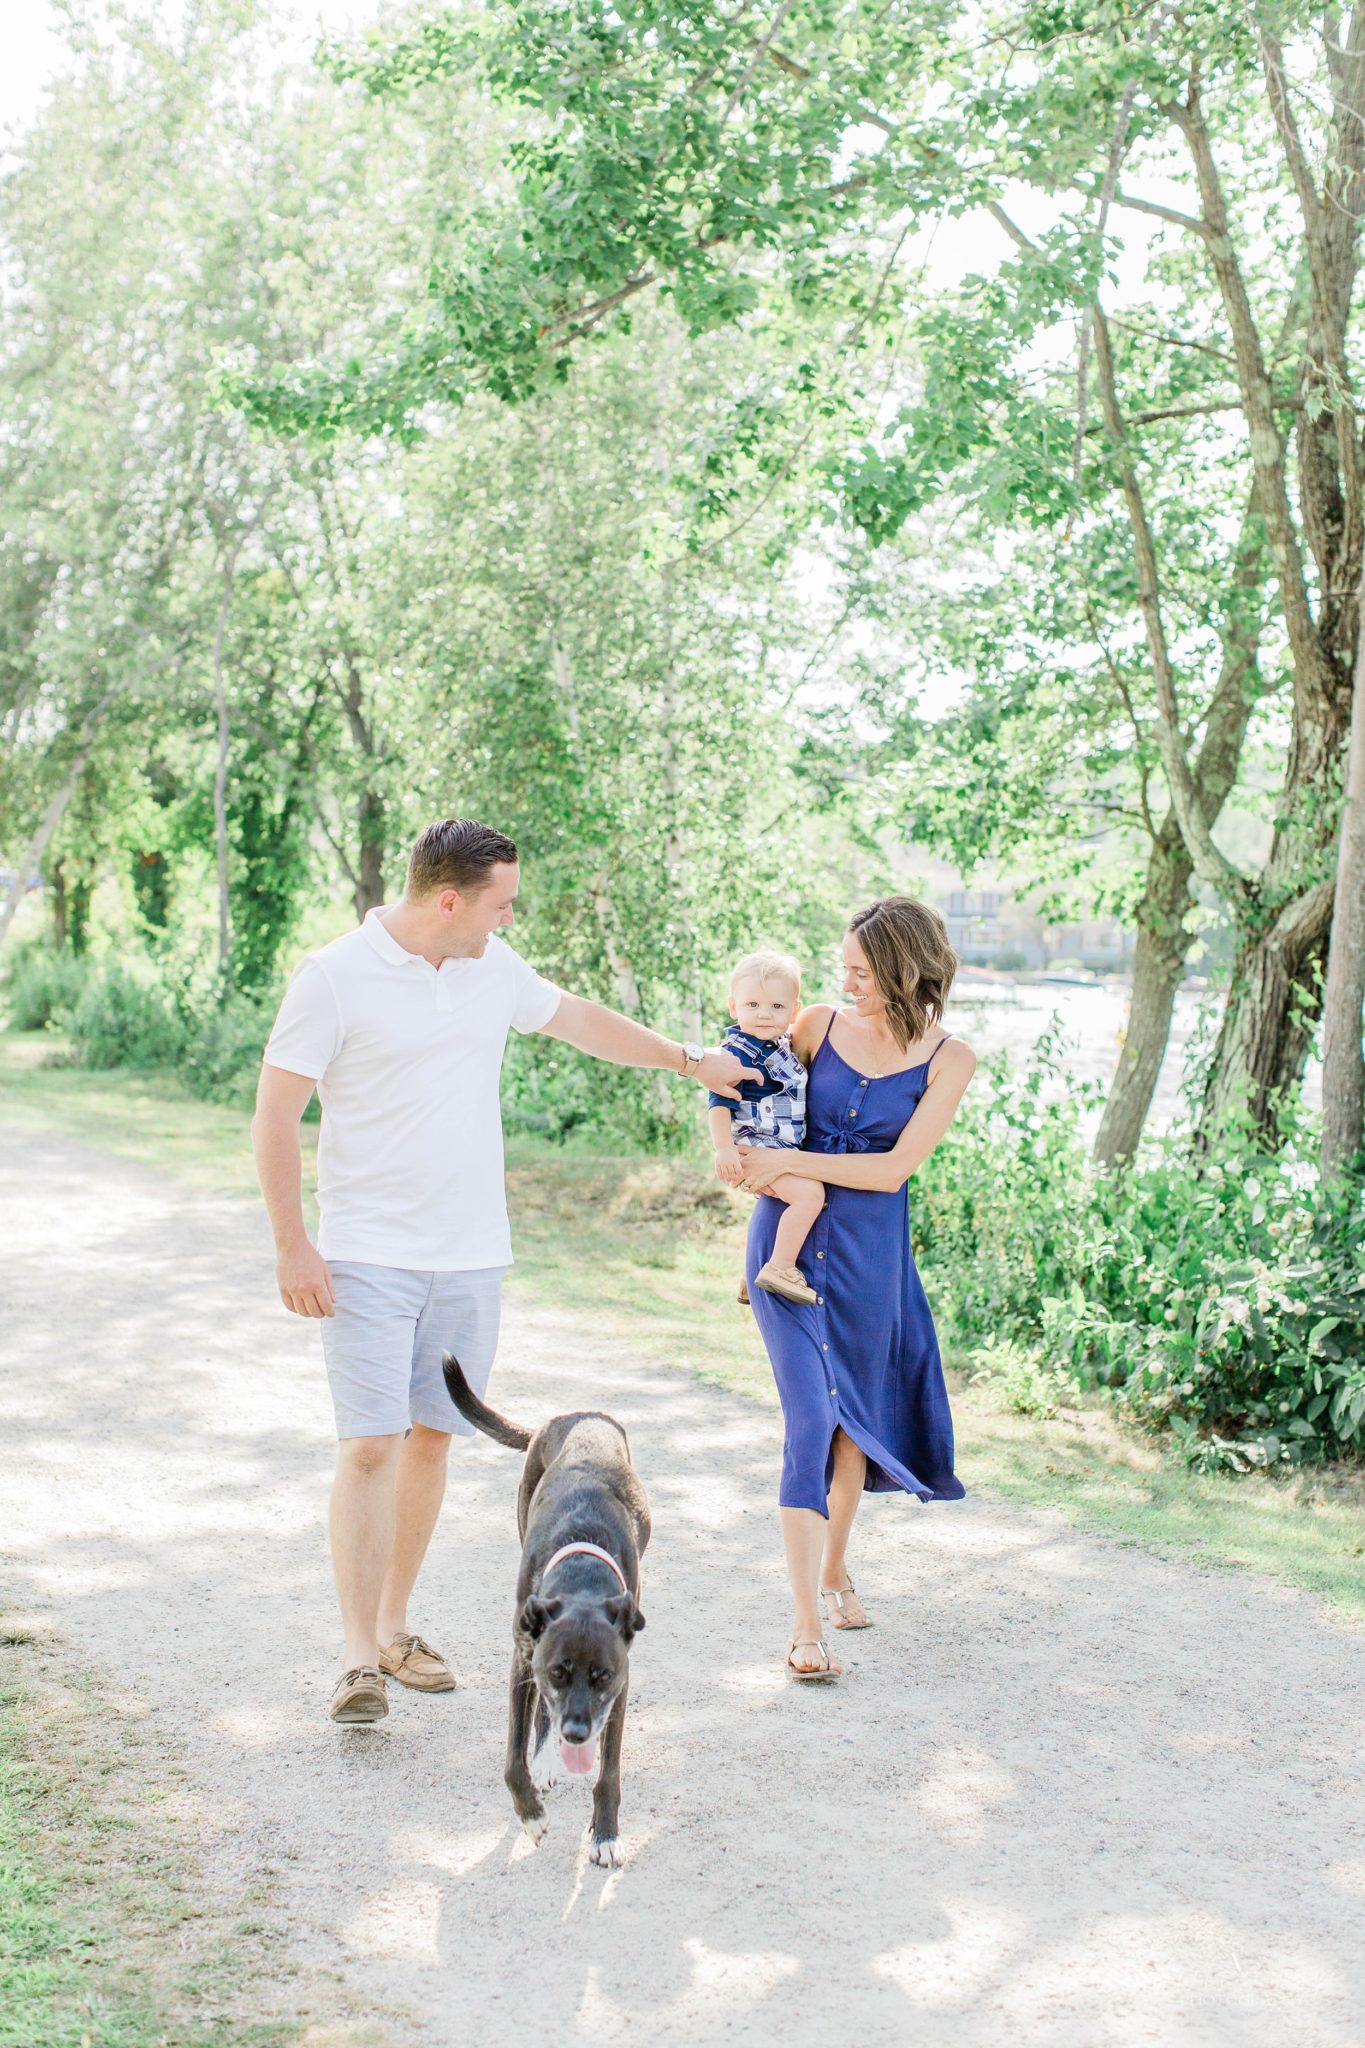 Best of 2019: Lifestyle - Caitlin Page Photography | New Hampshire ...